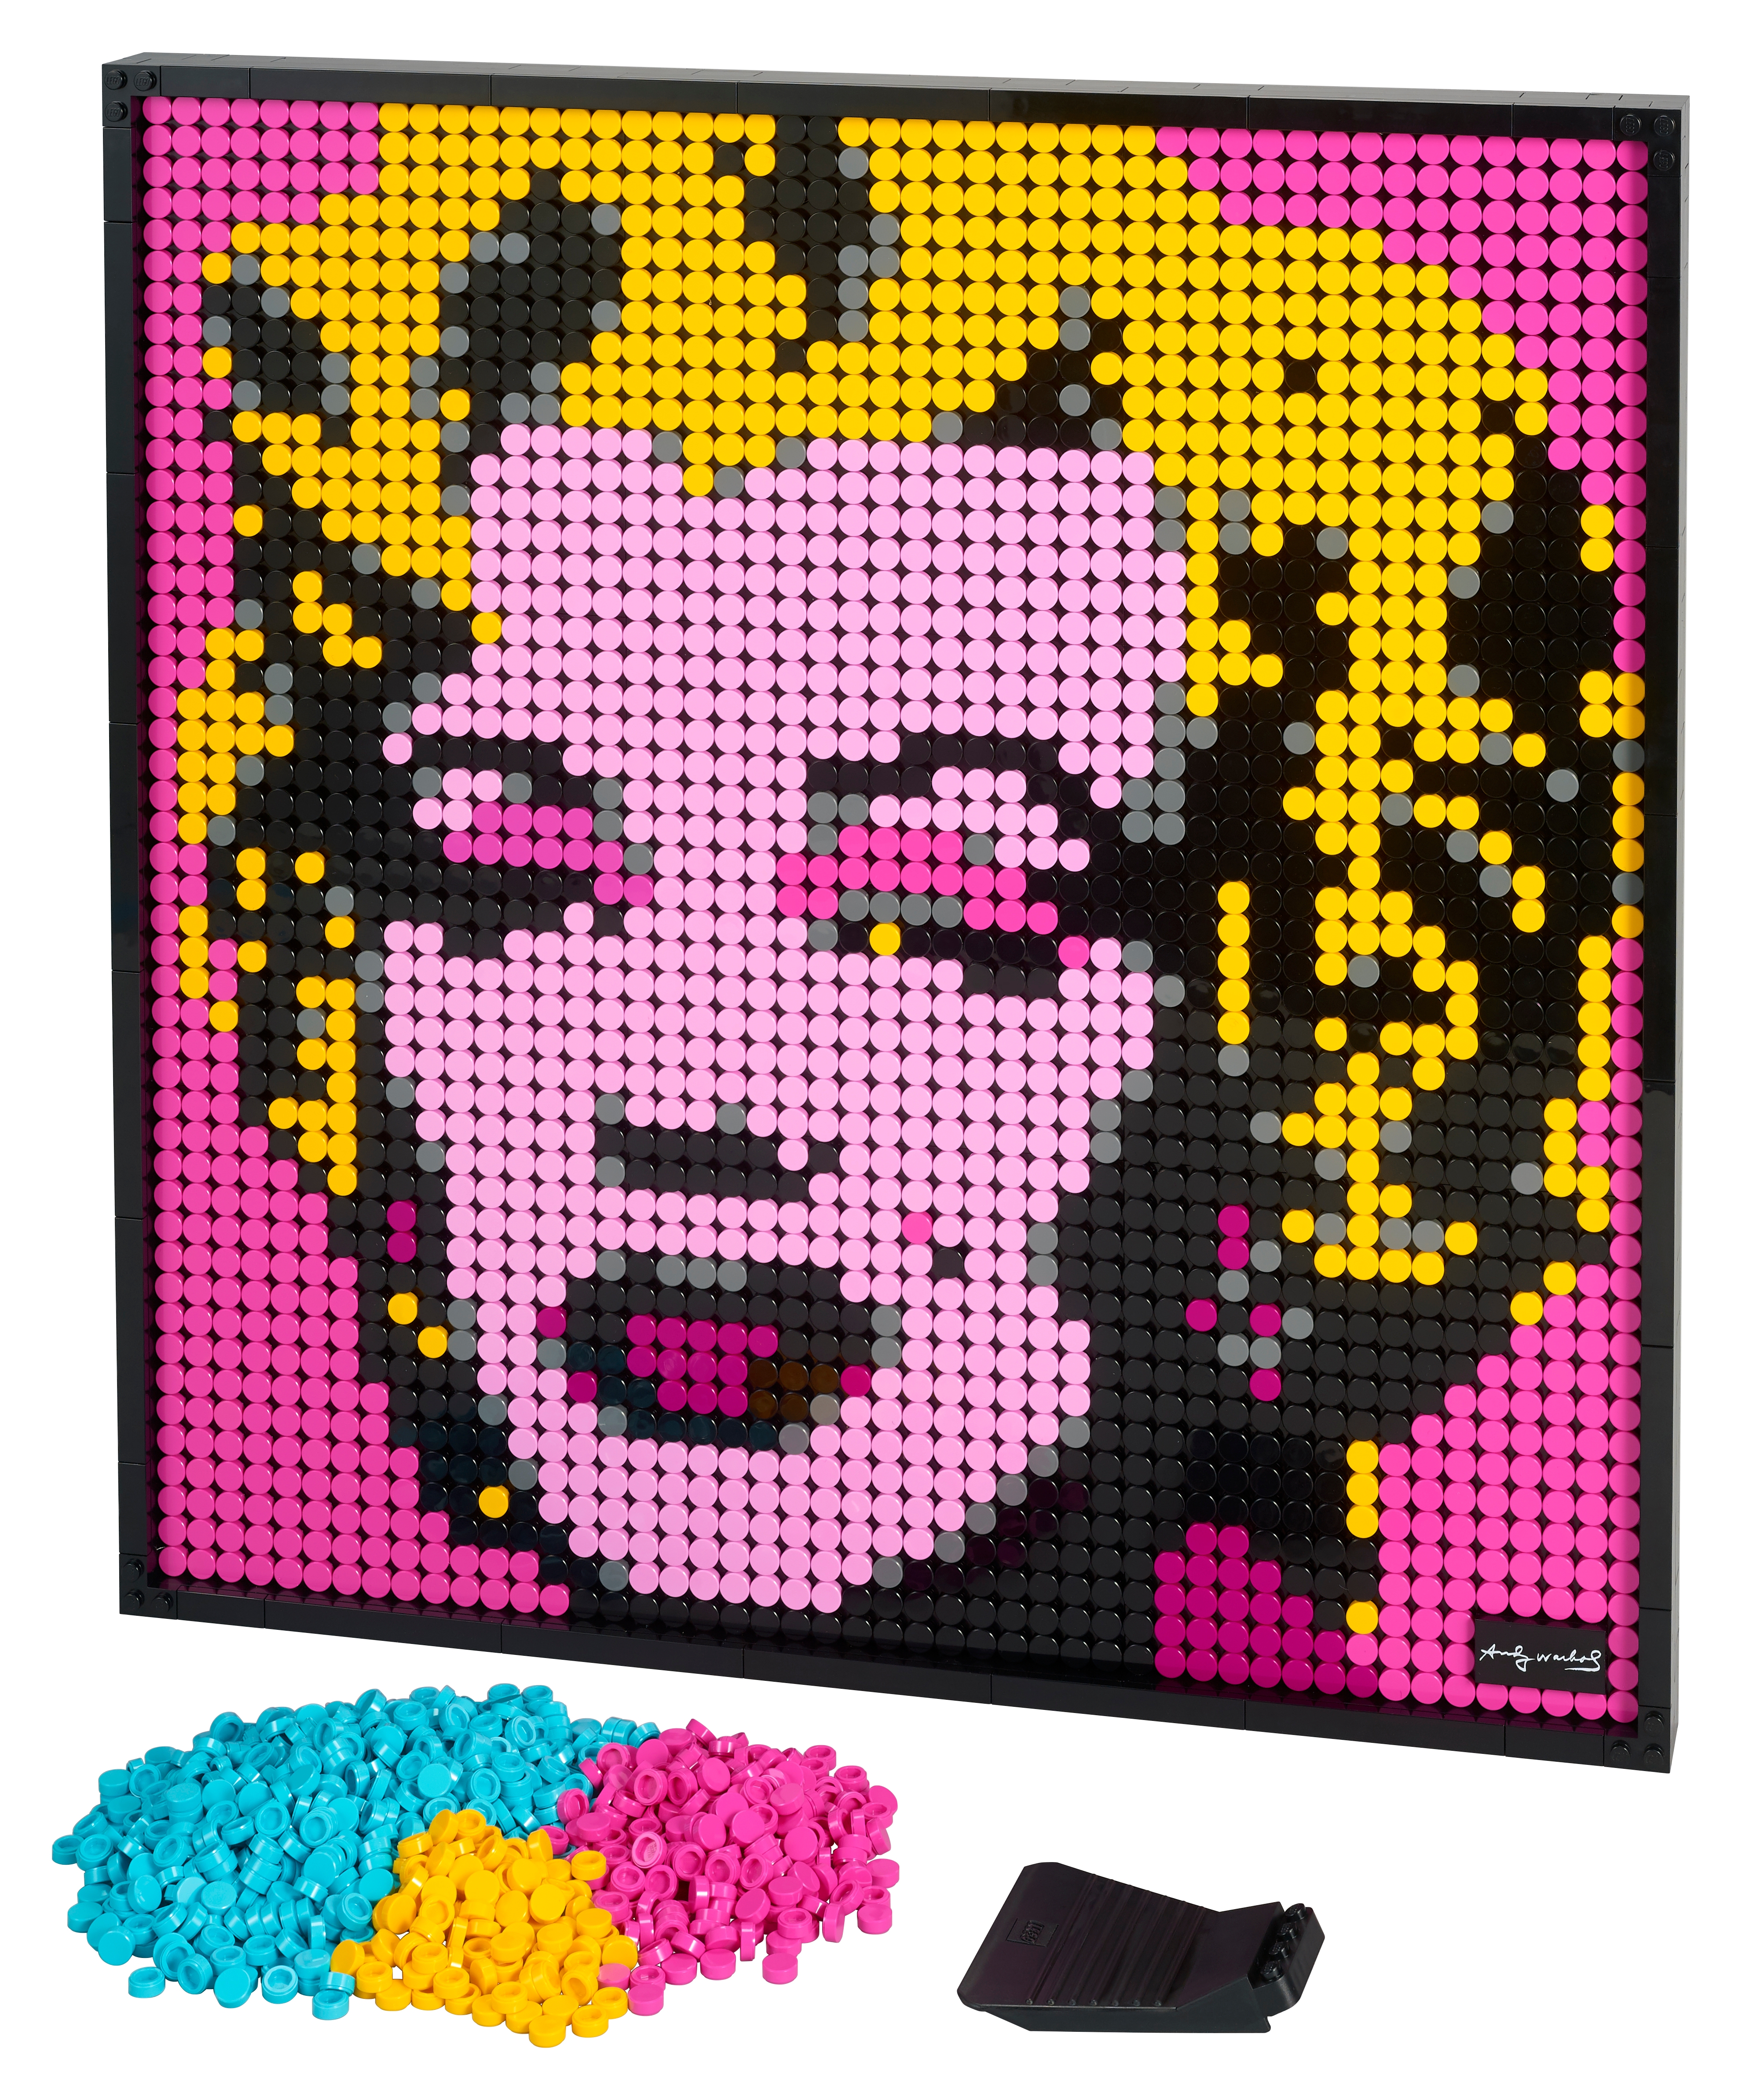 Louis Vuitton Pixel Art Wall Poster - Build Your Own with Bricks